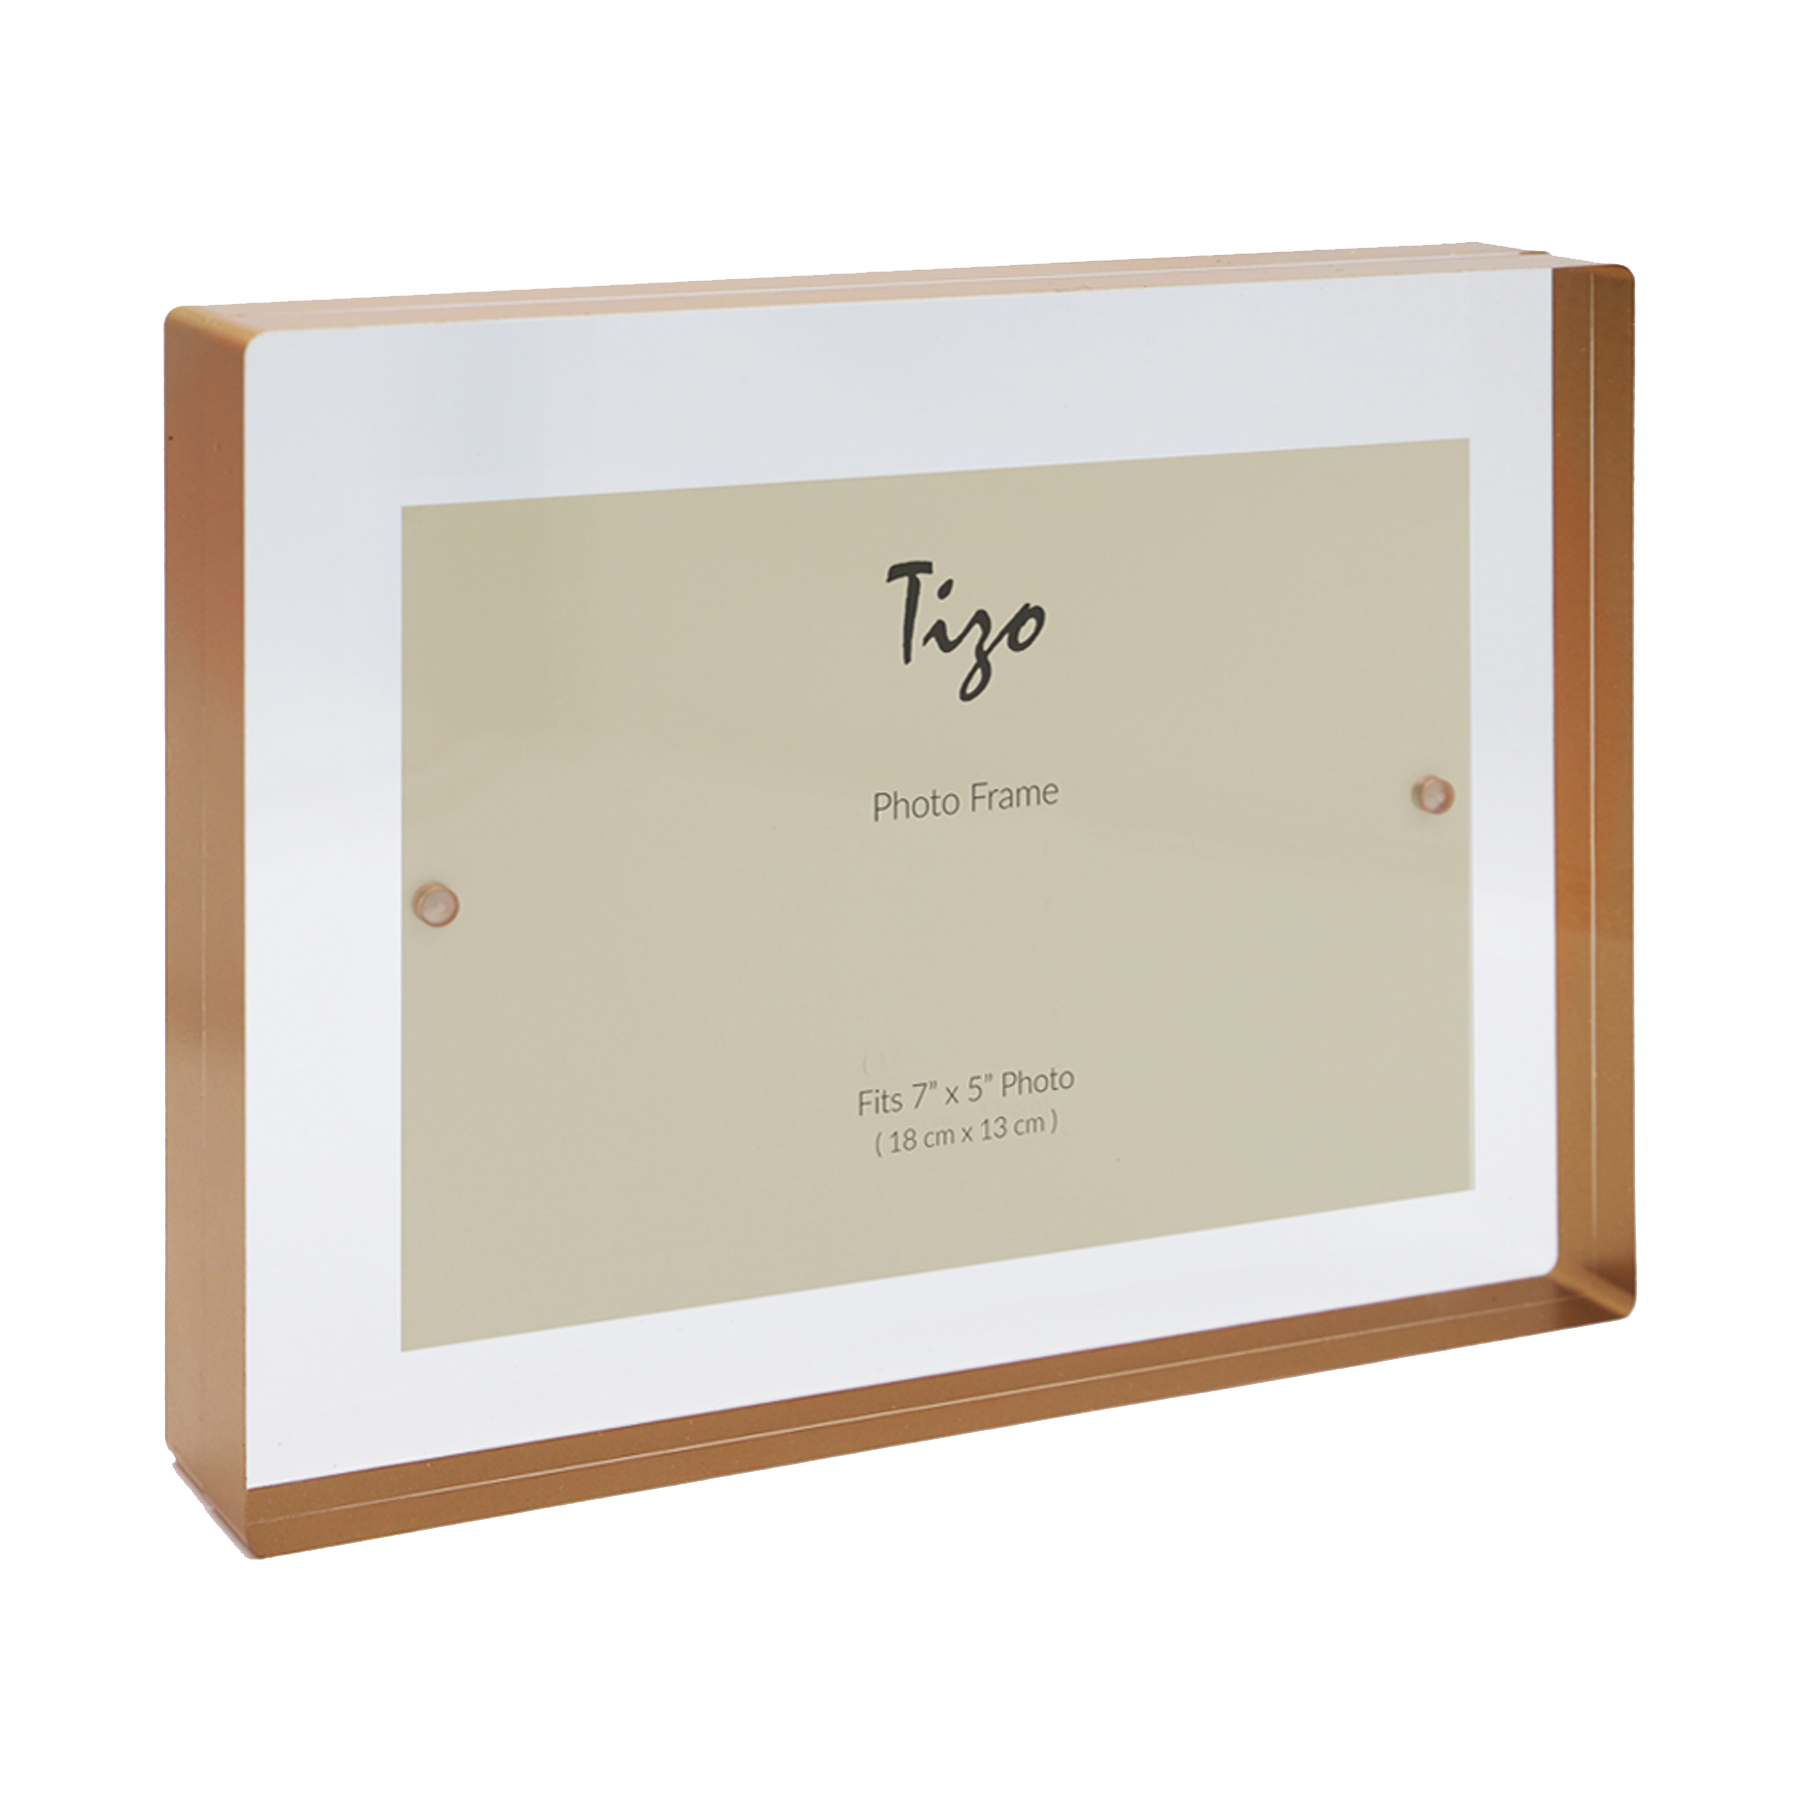 A photo of an acrylic tabletop photo frame from Hall of Frames